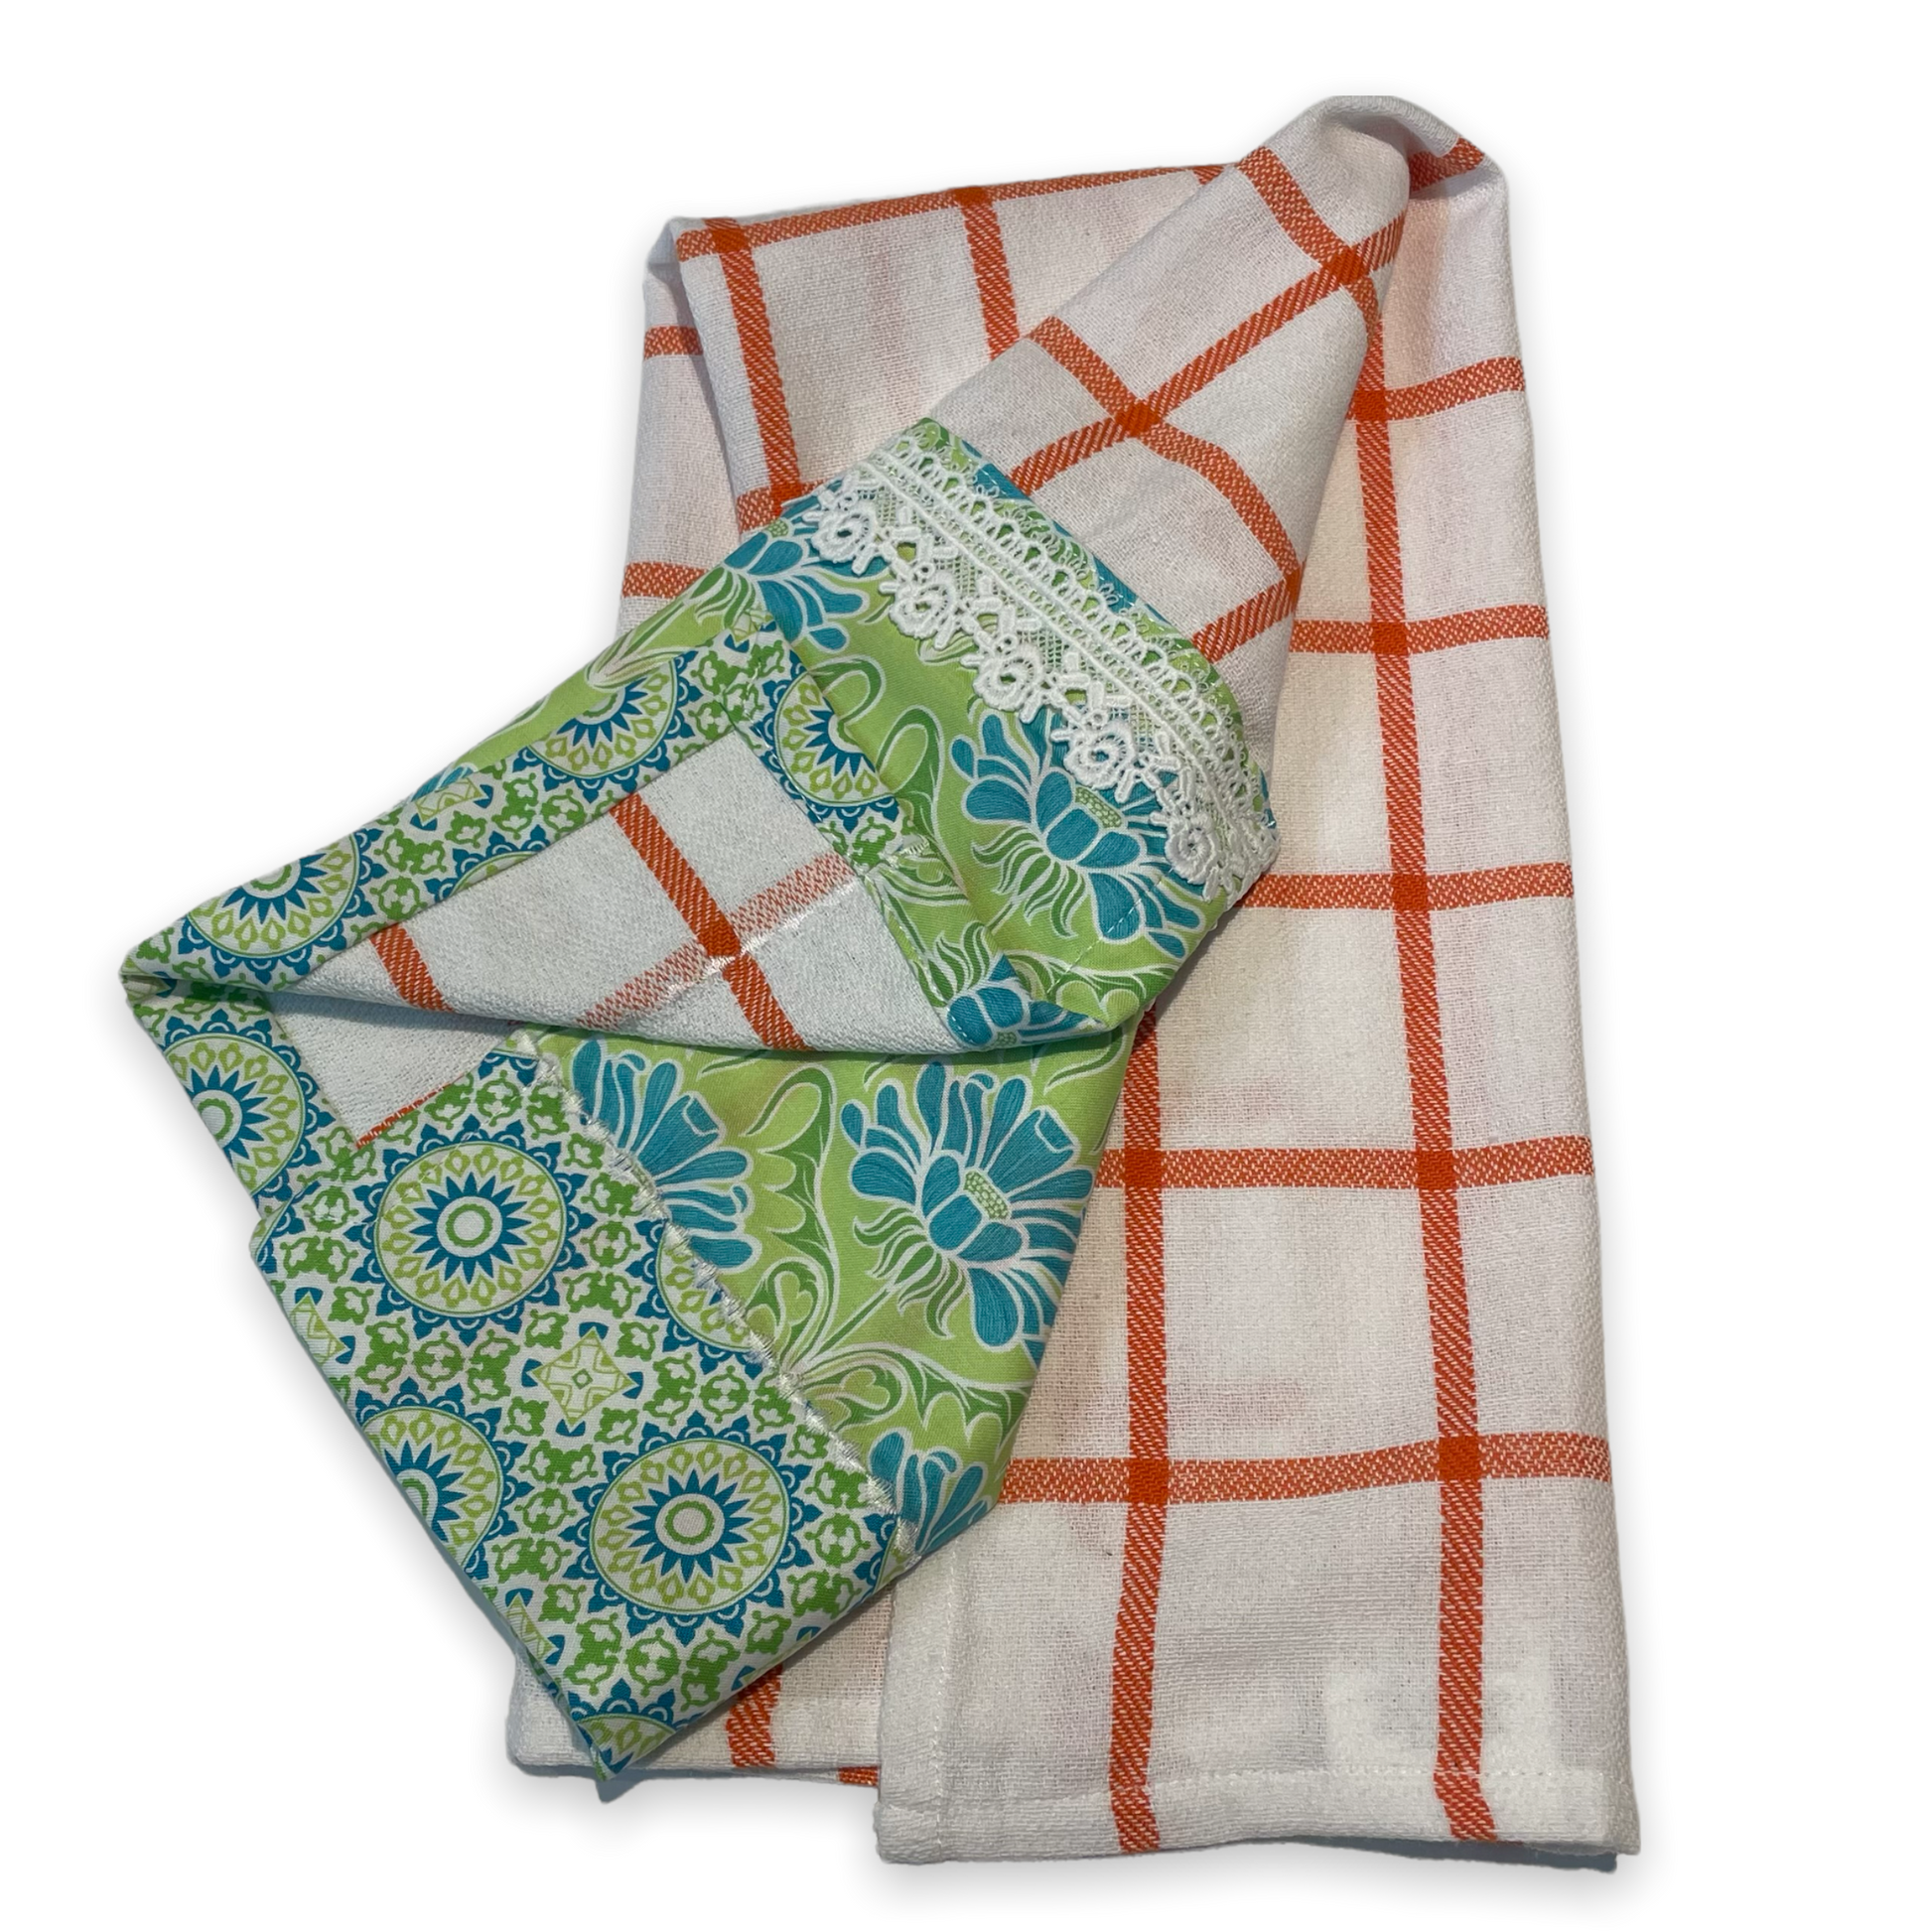 Cute Retro Decorative Dish Towel. Orange and White Checked Tea Towel with Handcrafted Accents - Home Stitchery Decor